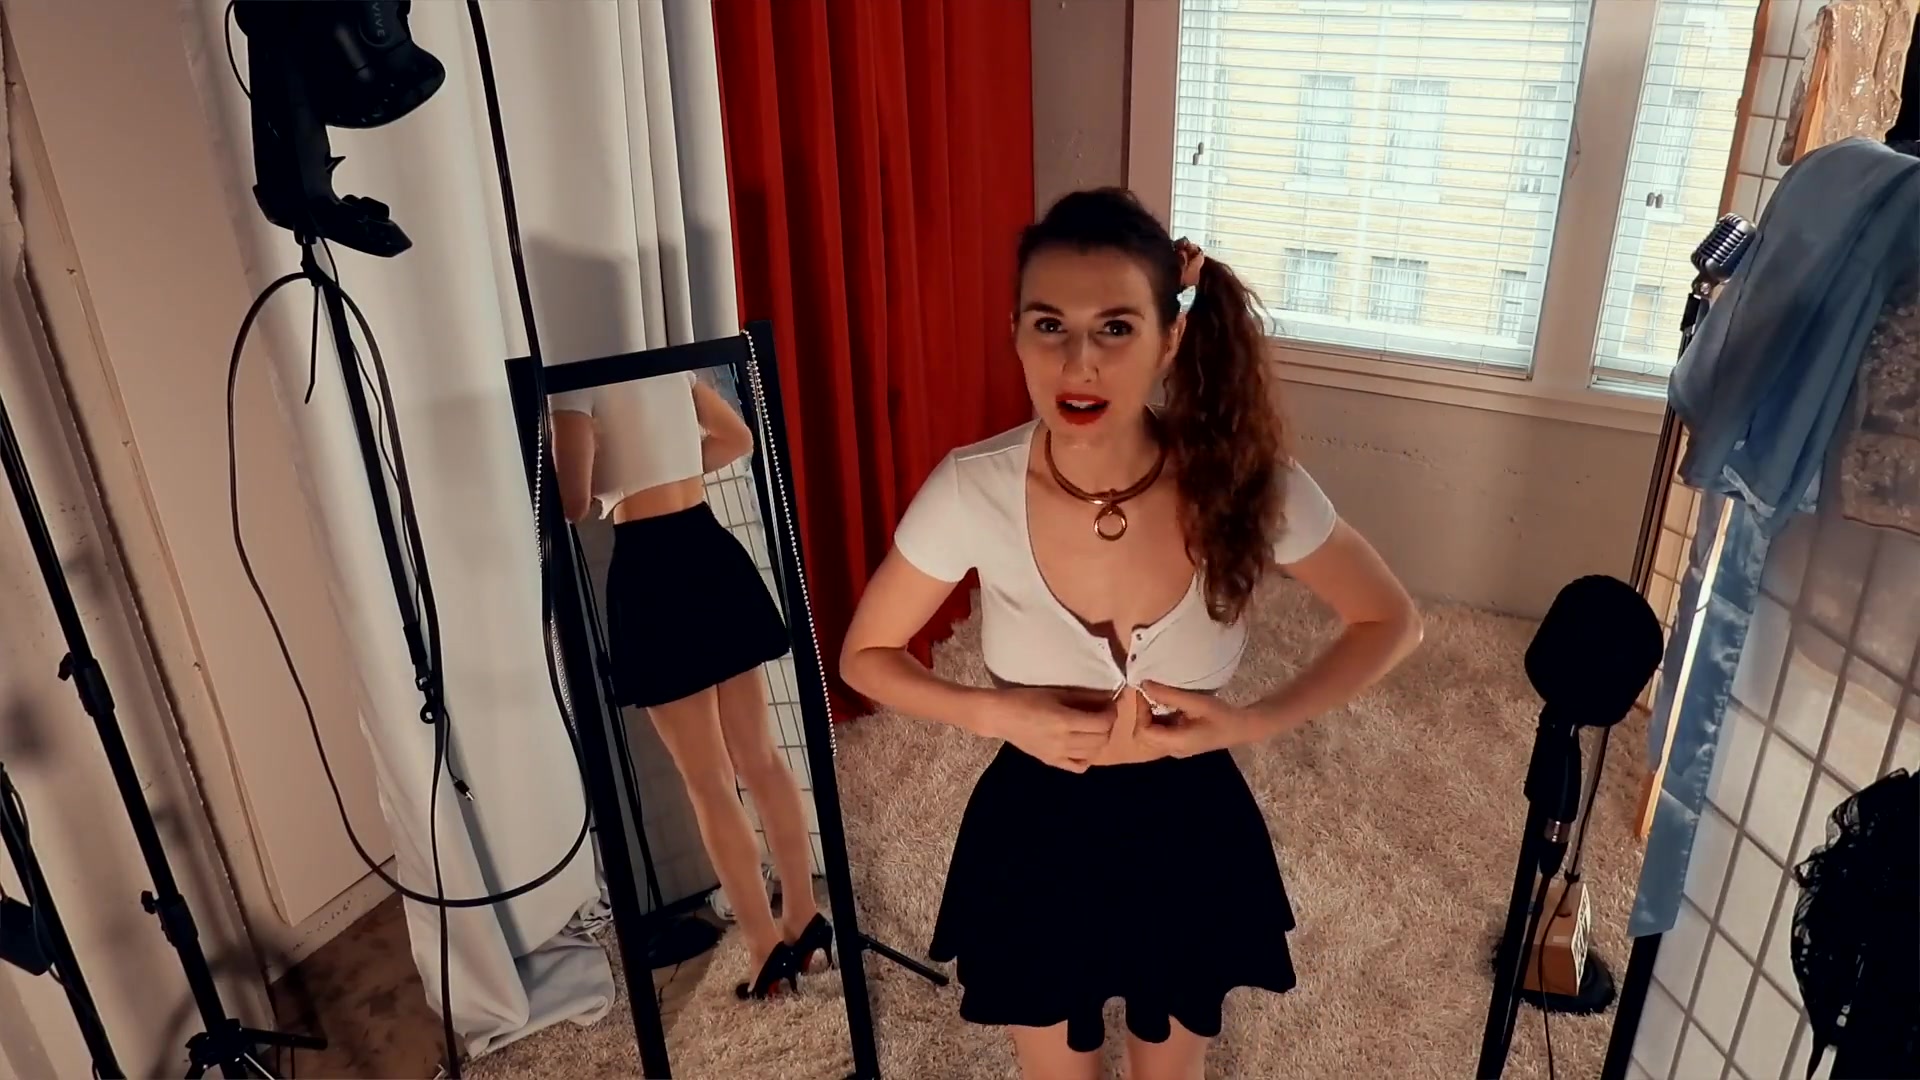 Piper blush will it fit friday uncensored